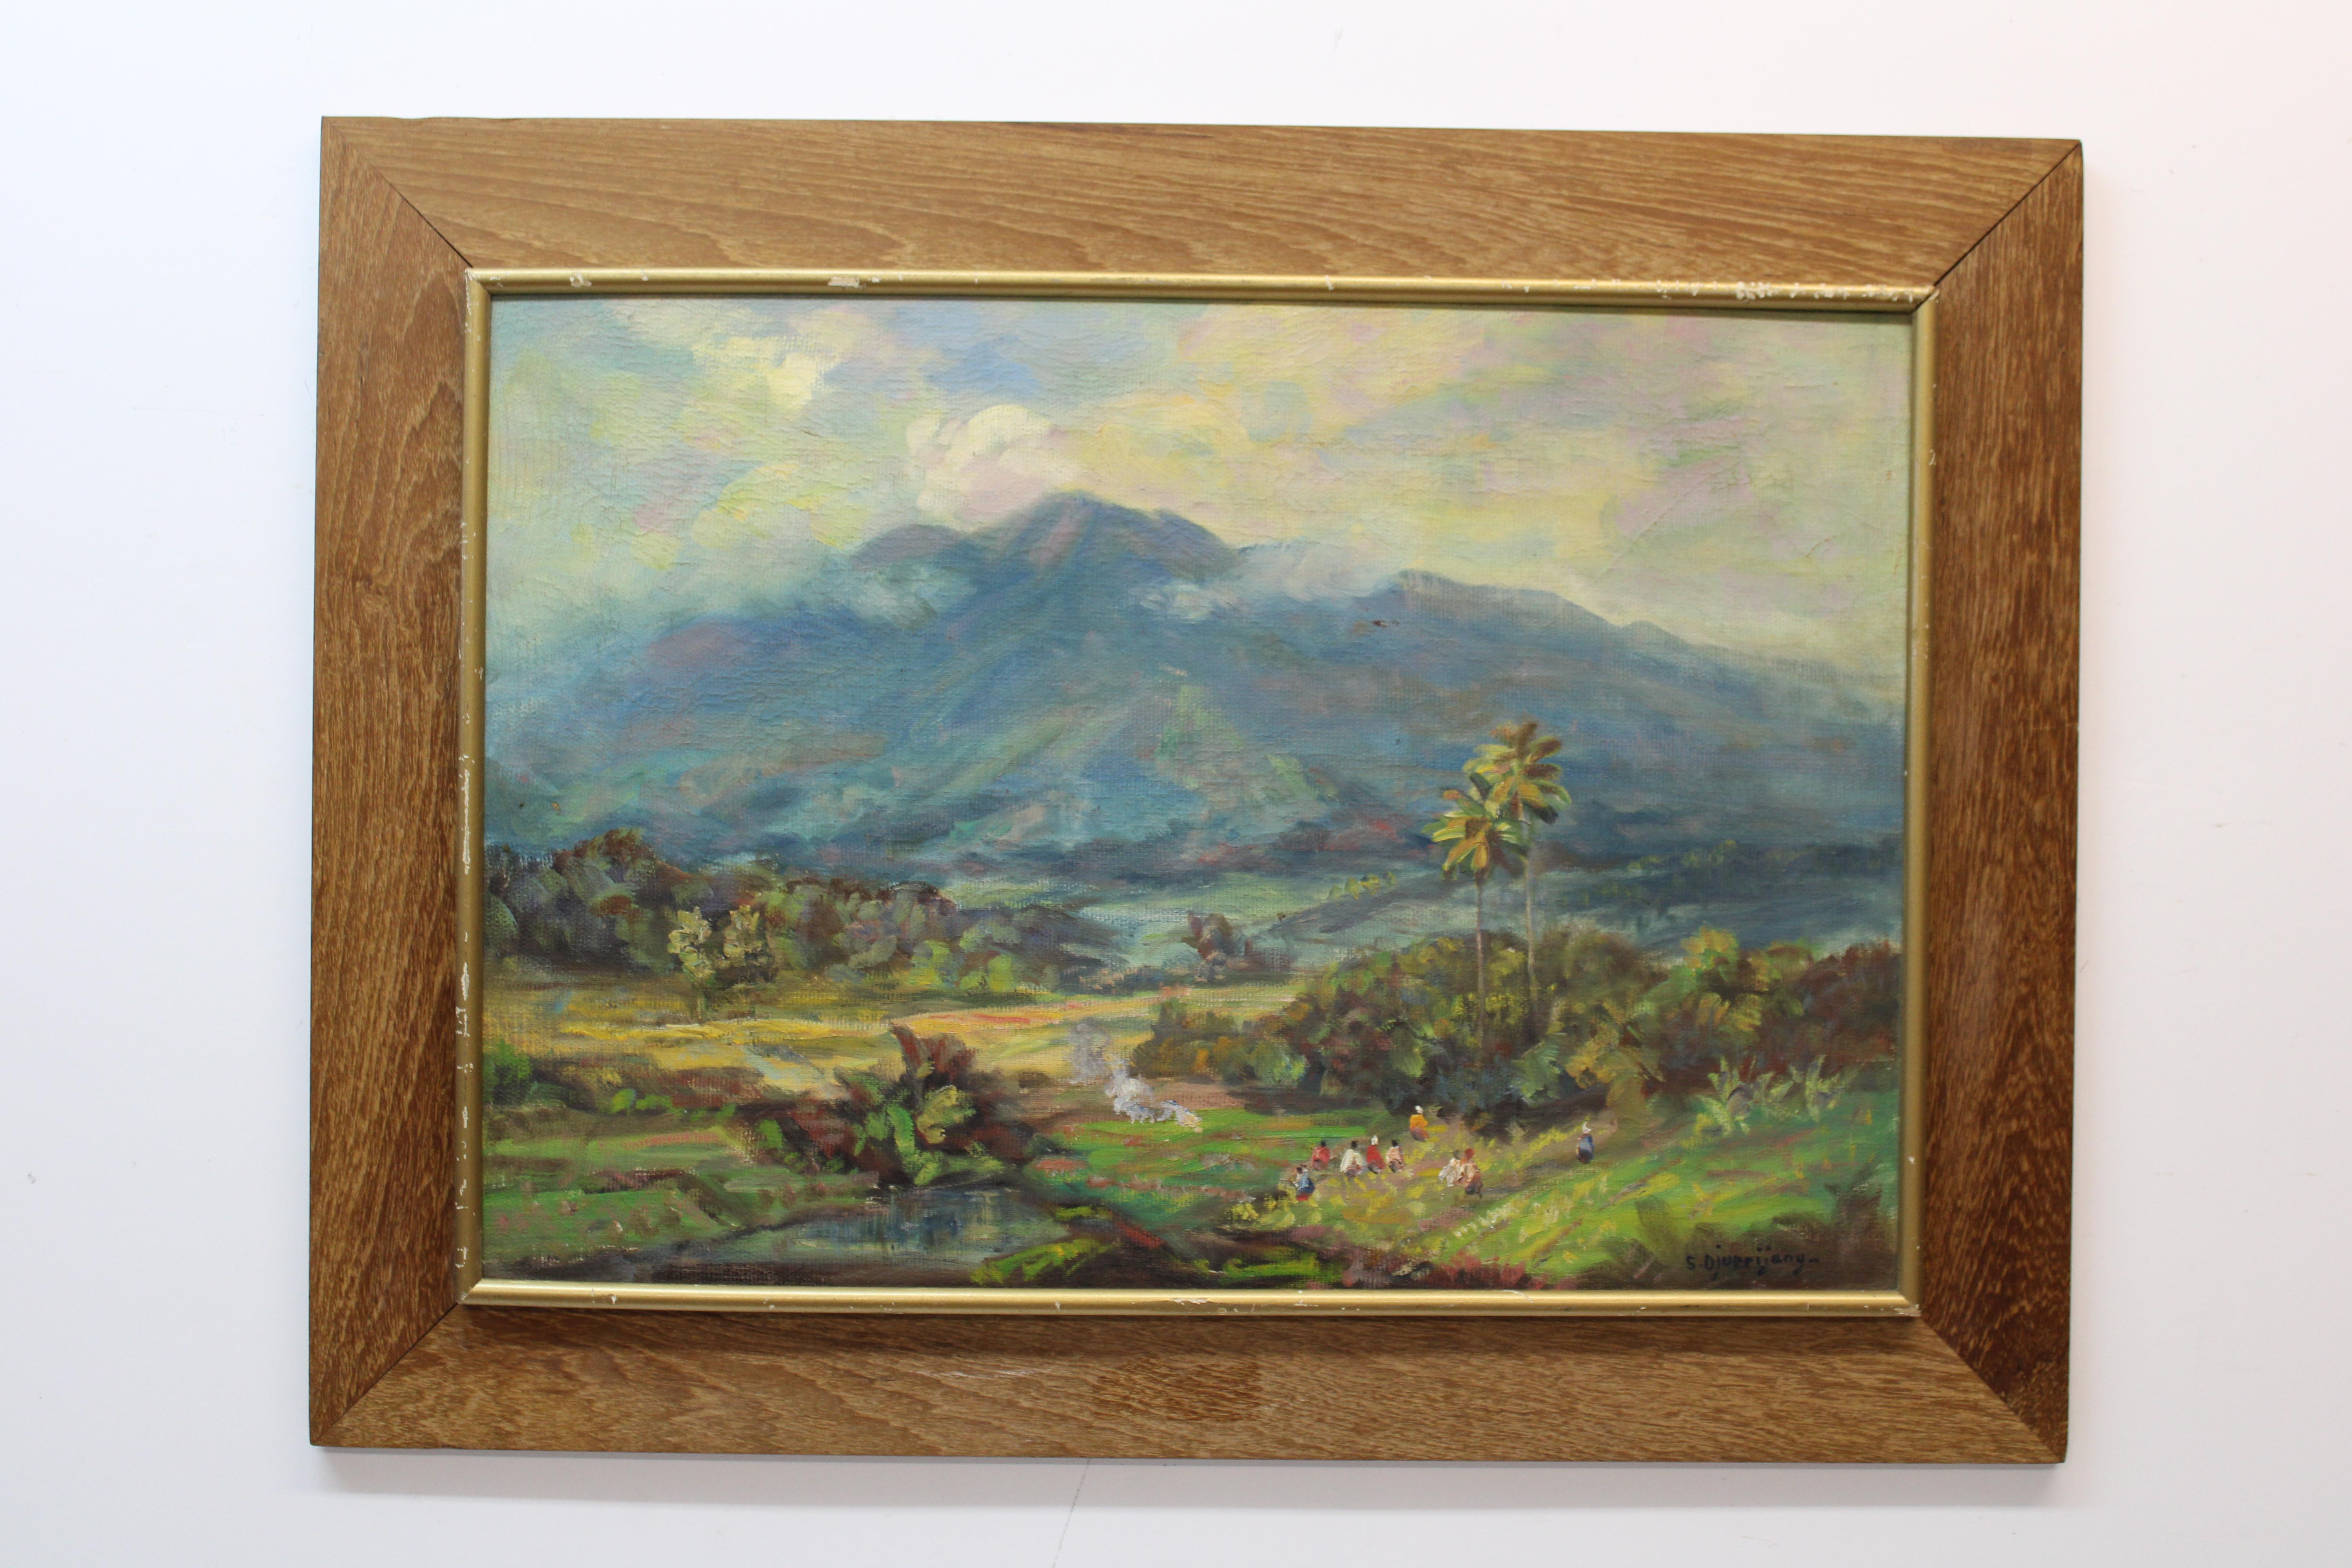 Unknown Landscape Painting - S. Djuppijany " Philippines Landscape "